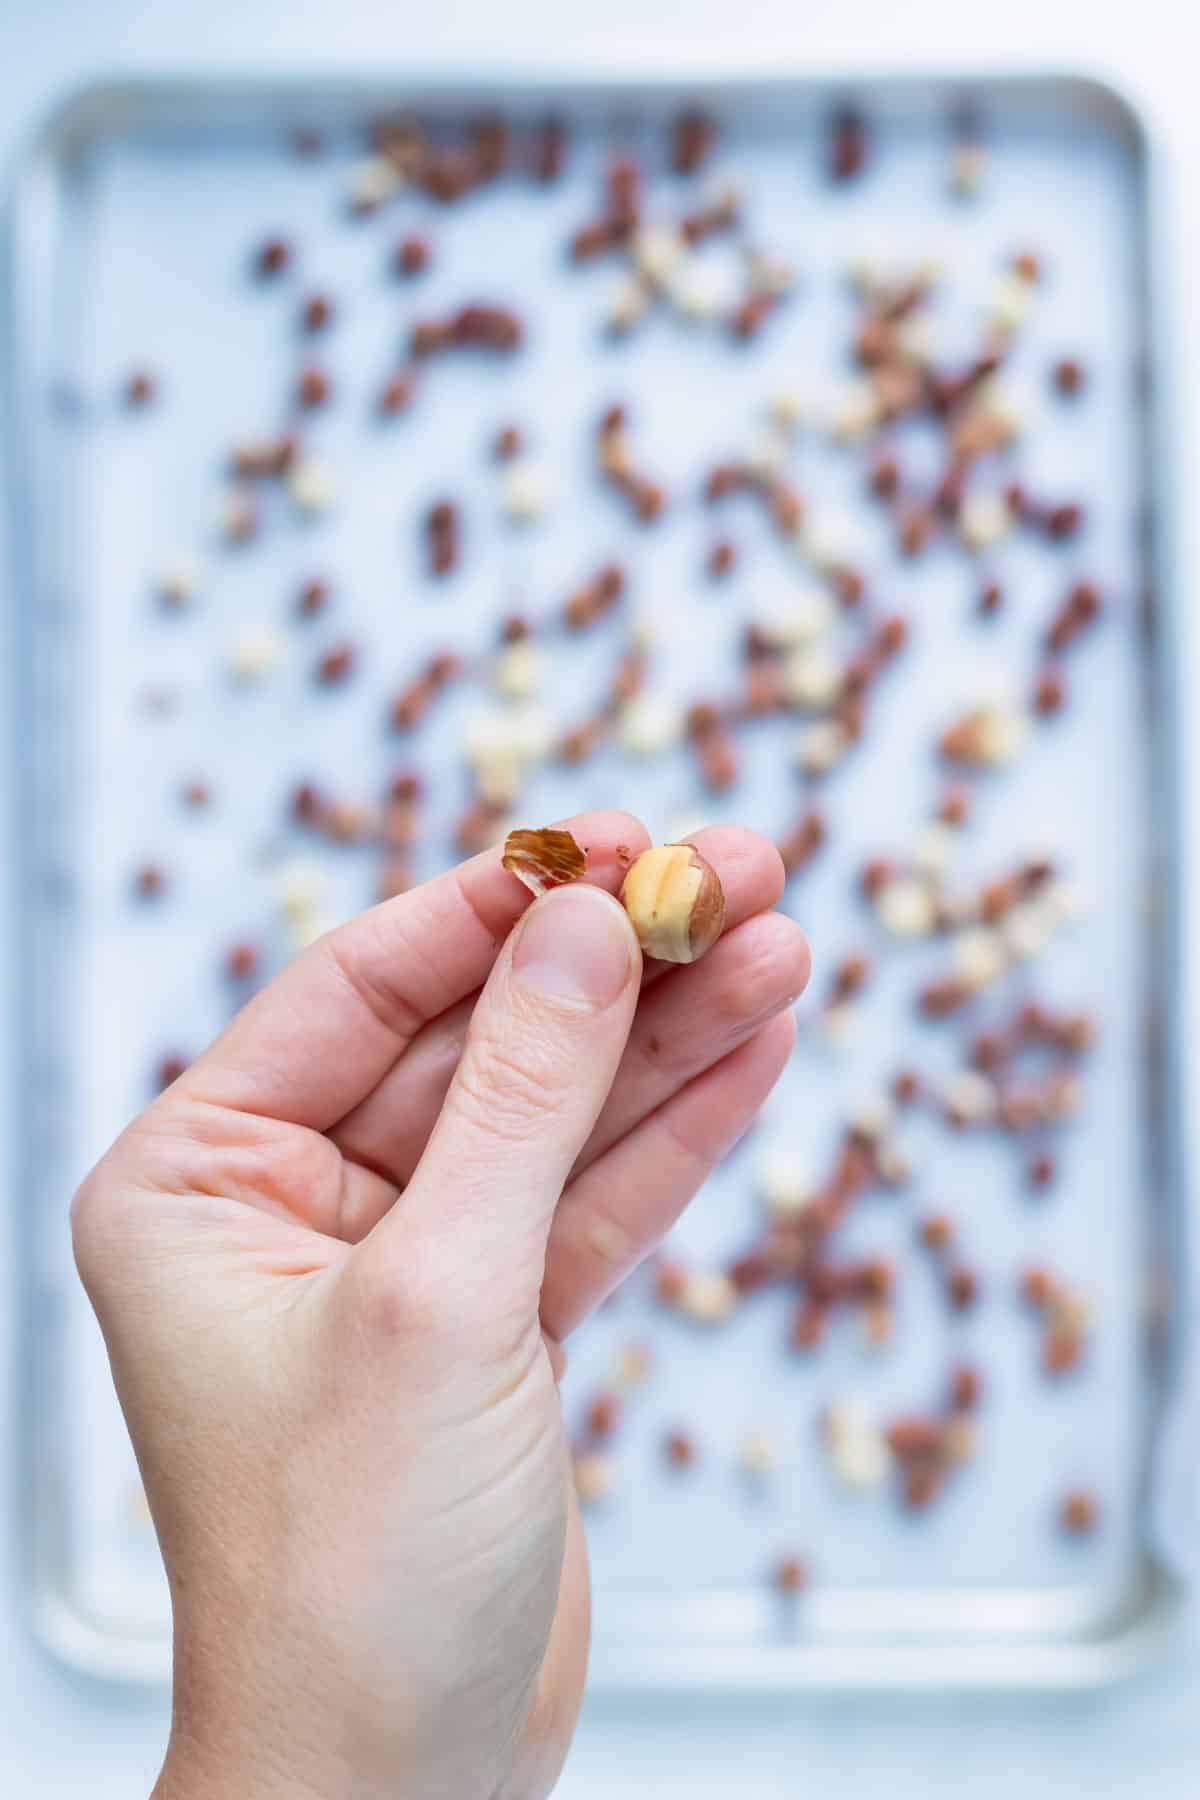 Toasted hazelnuts have the peel removed by hand.